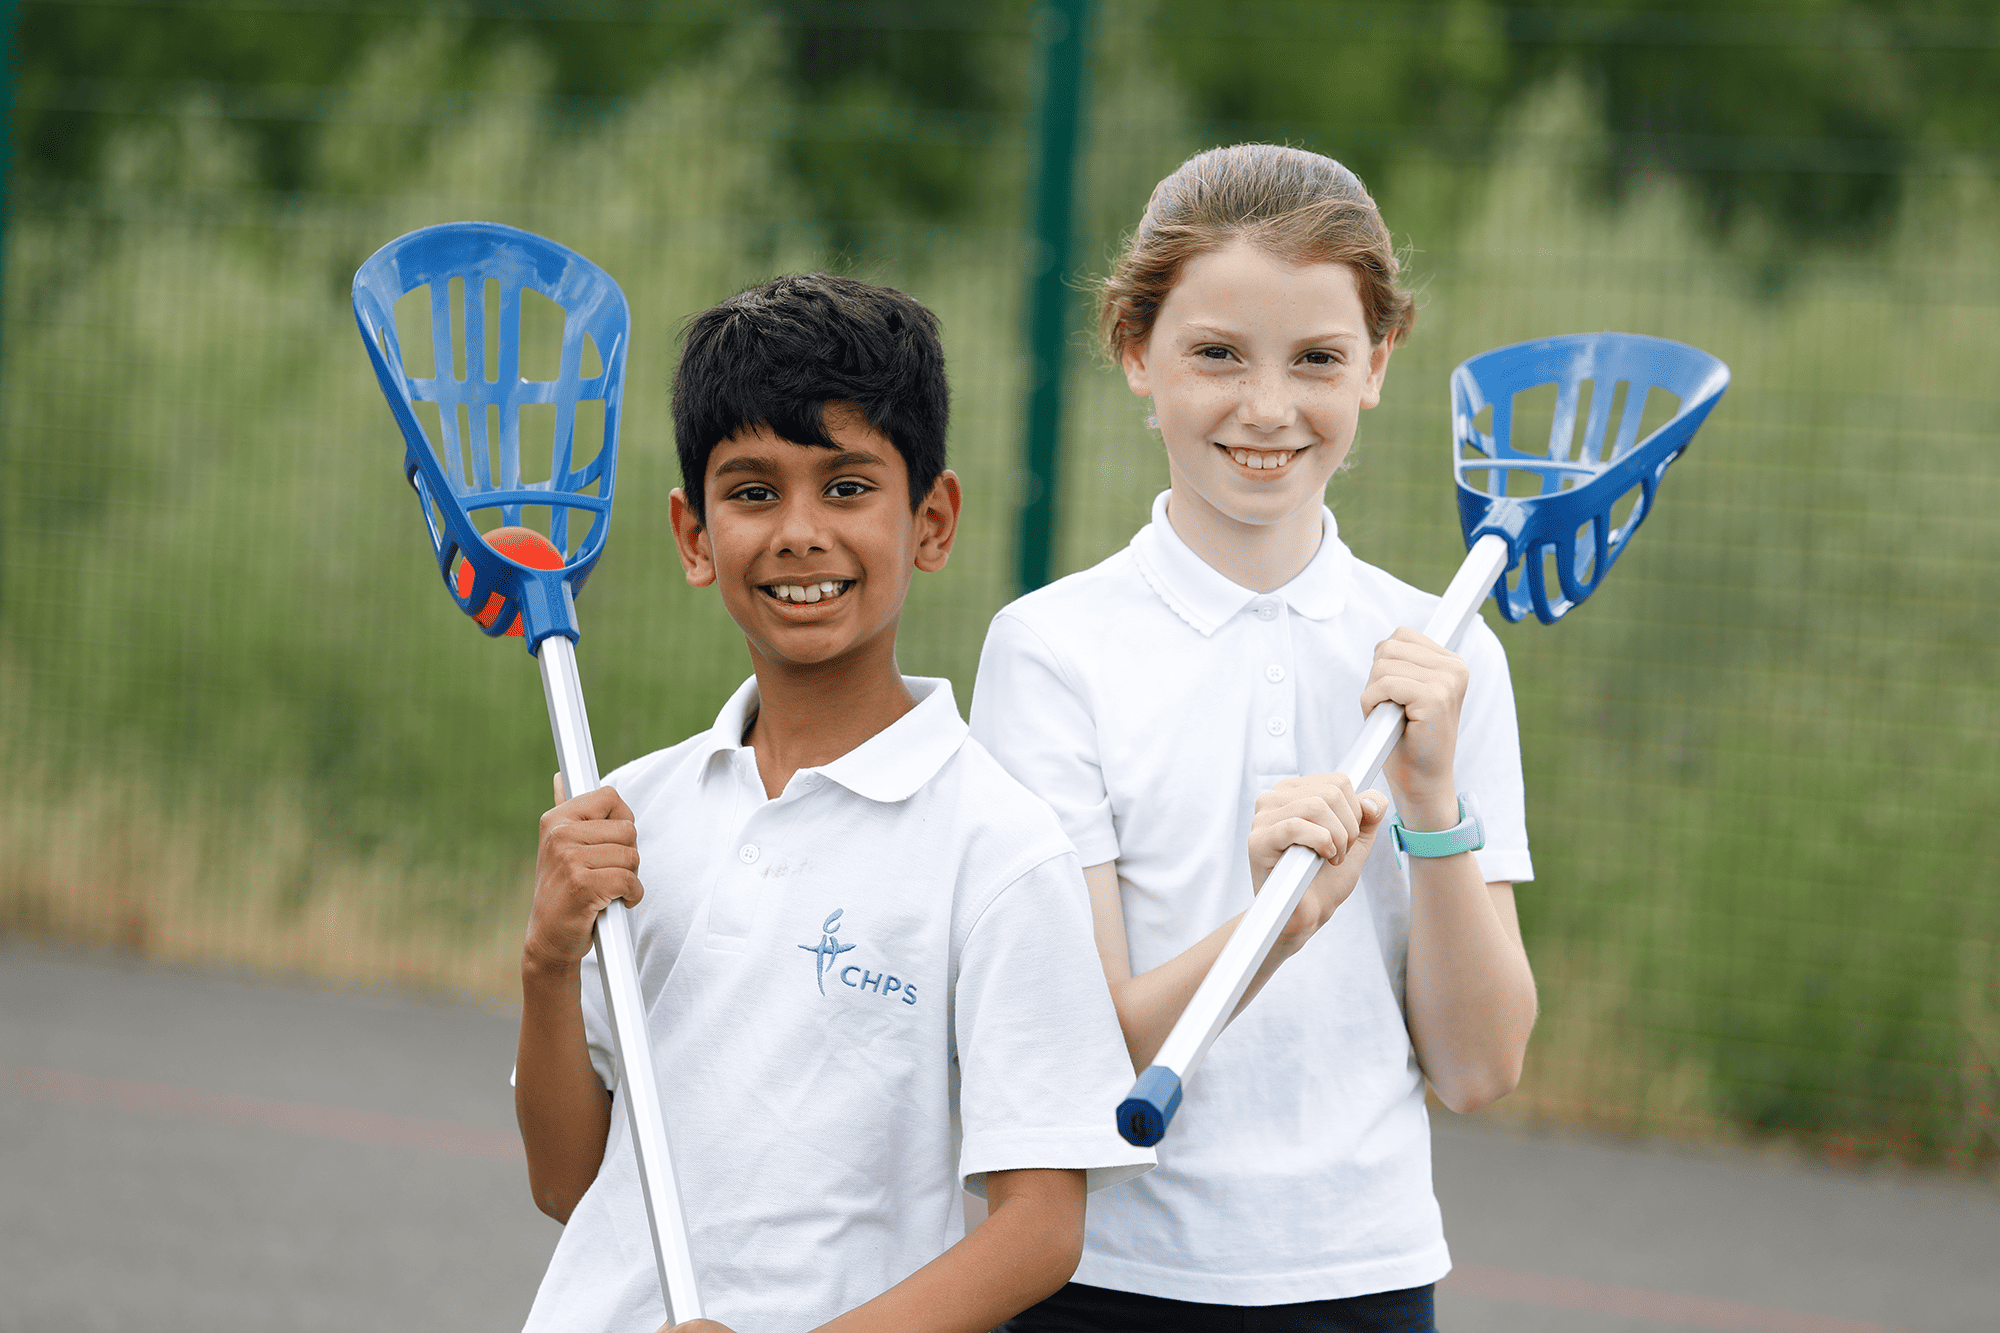 Cheadle Hulme Primary School pupils in PE playing lacrosse.